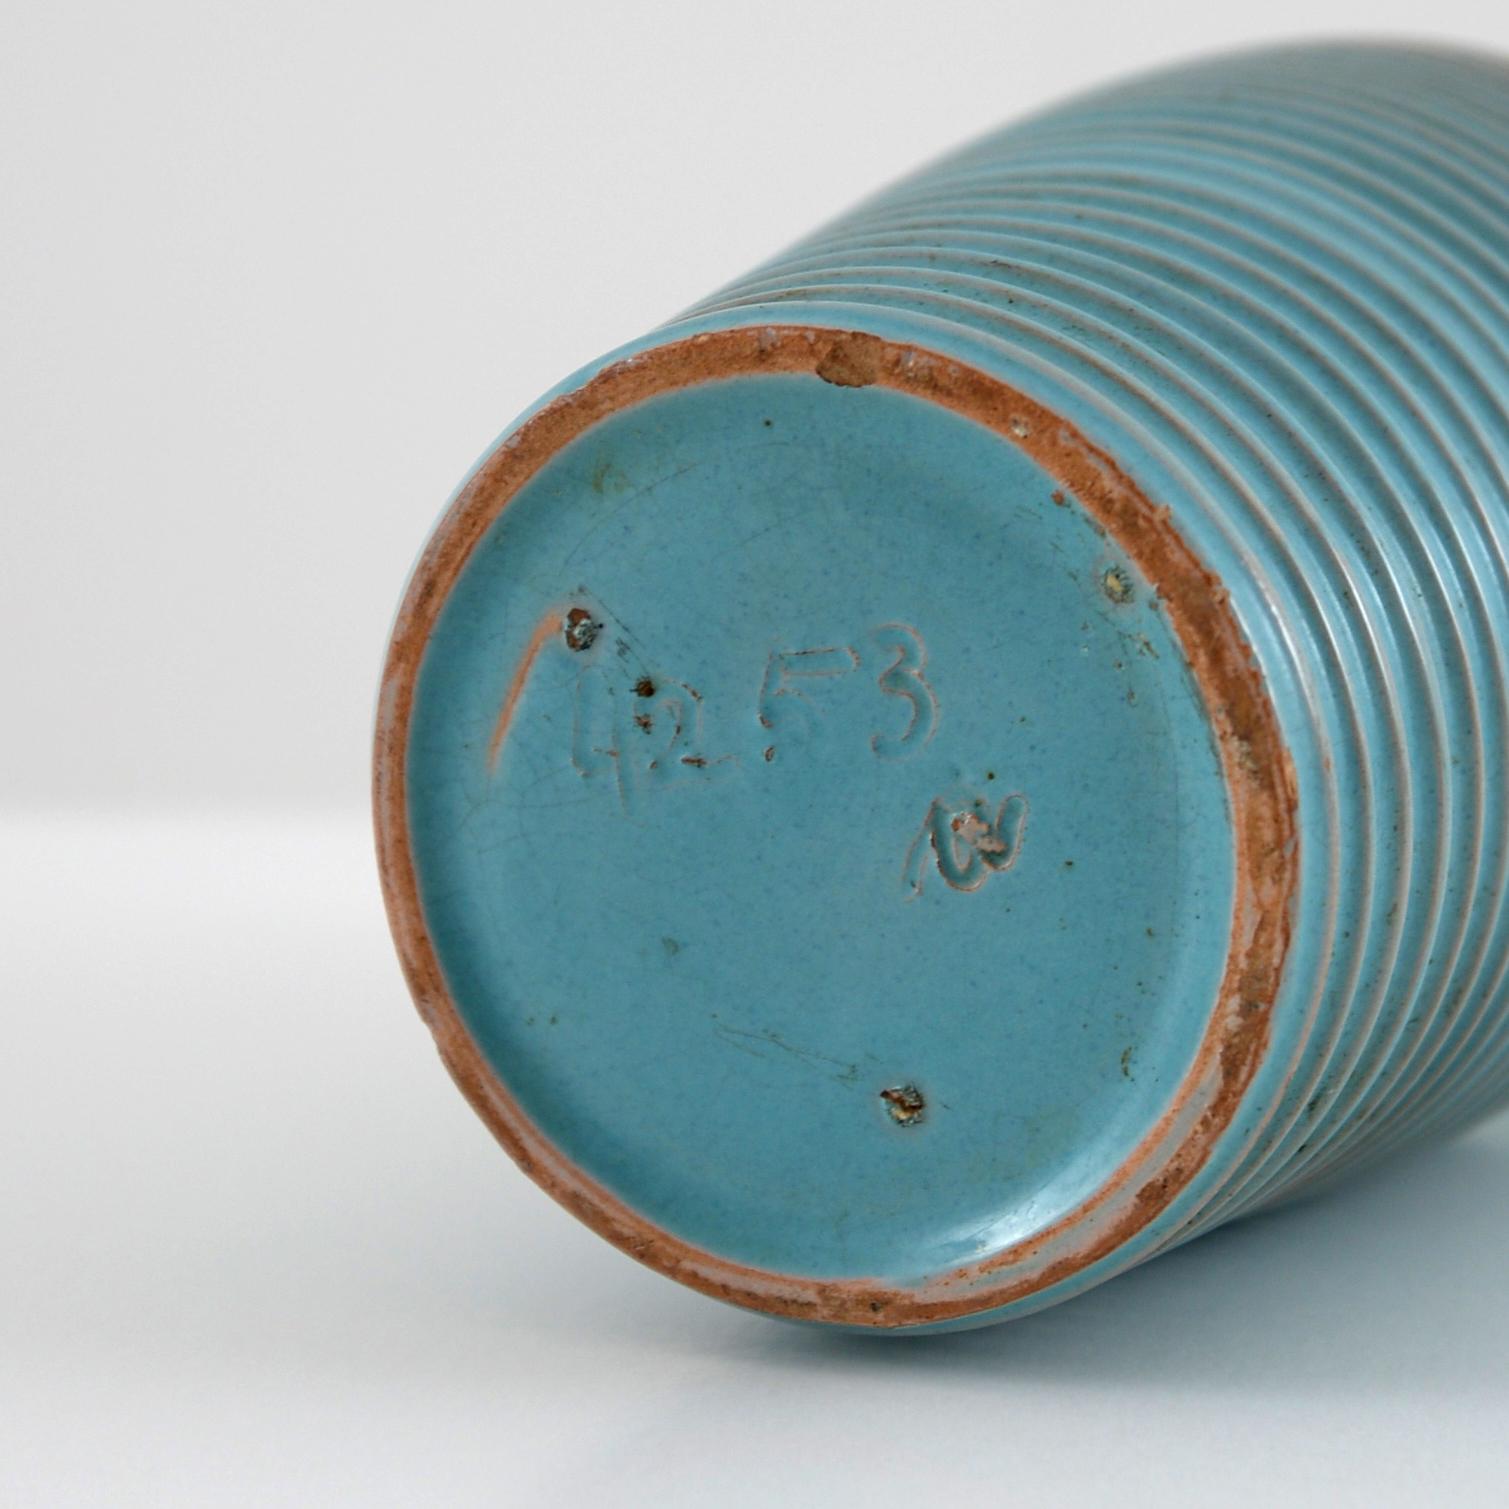 Glazed Bauhaus Ceramic Vase with Grooves Decor and Glaze in Cyan Tone, Germany, 1930